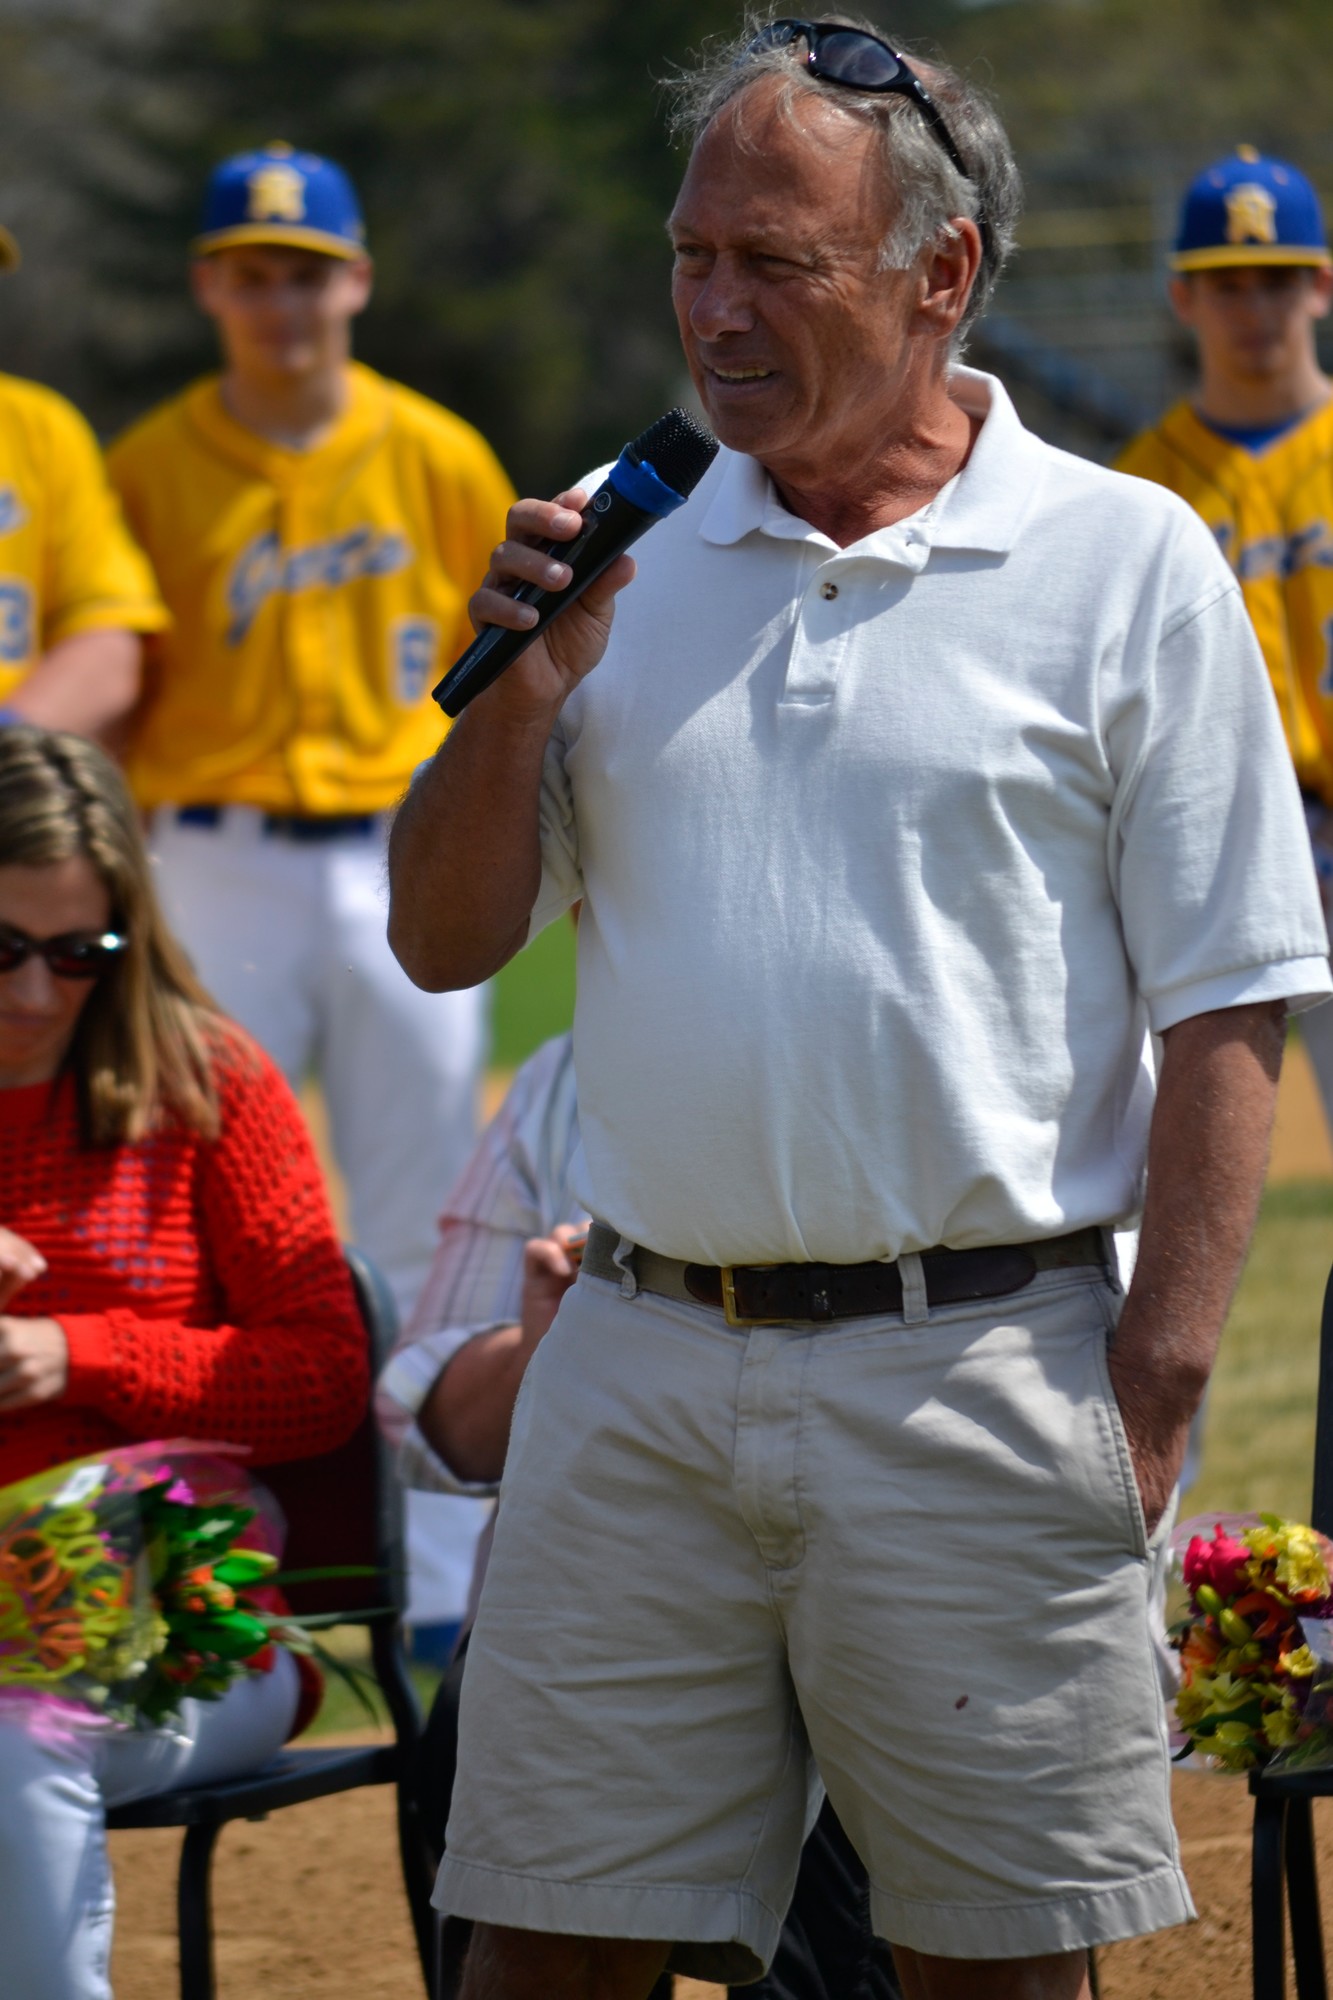 In his 33 years as varsity coach, Sicoli won 13 conference championships.